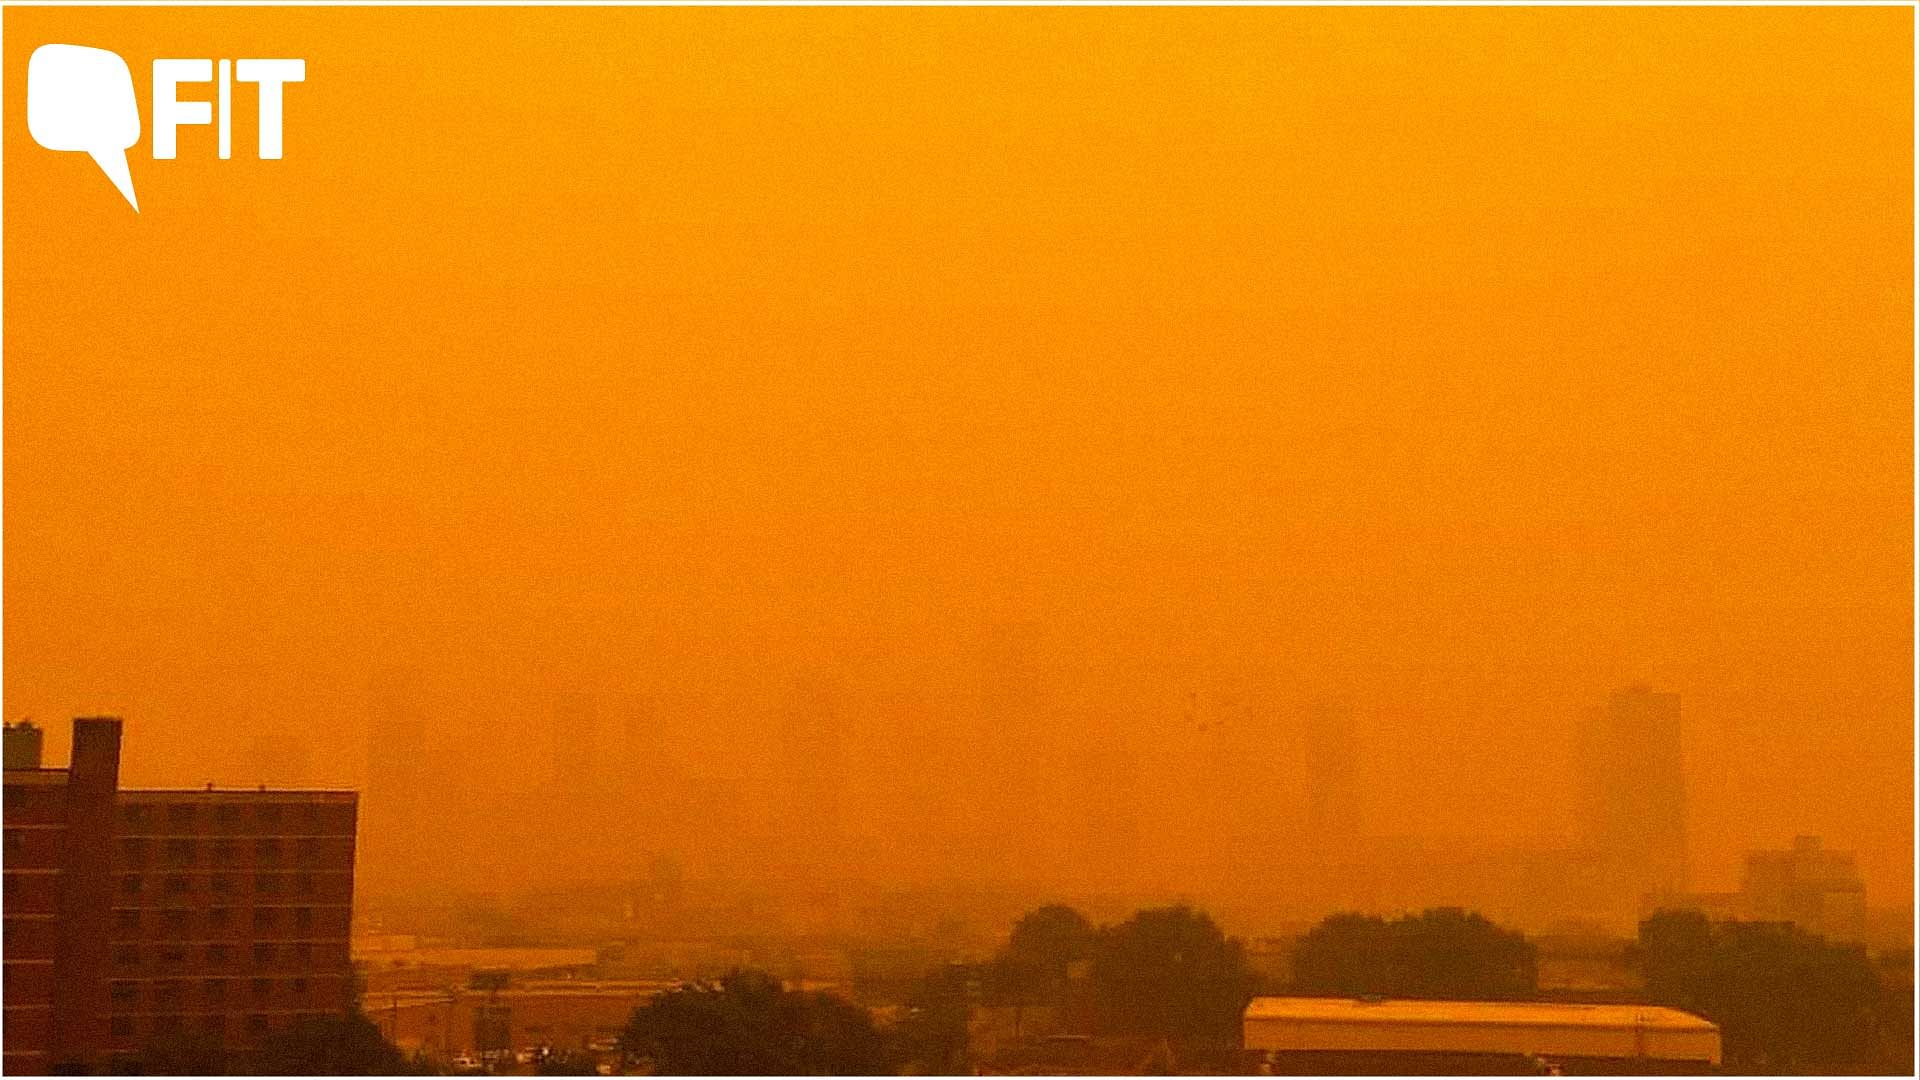 <div class="paragraphs"><p><strong><a href="https://www.thequint.com/podcast/heatwaves-action-plan-india-aditya-pillai-podcast">FIT</a></strong> explains what health impacts wildfire smoke and toxic air can have on individuals.</p></div>